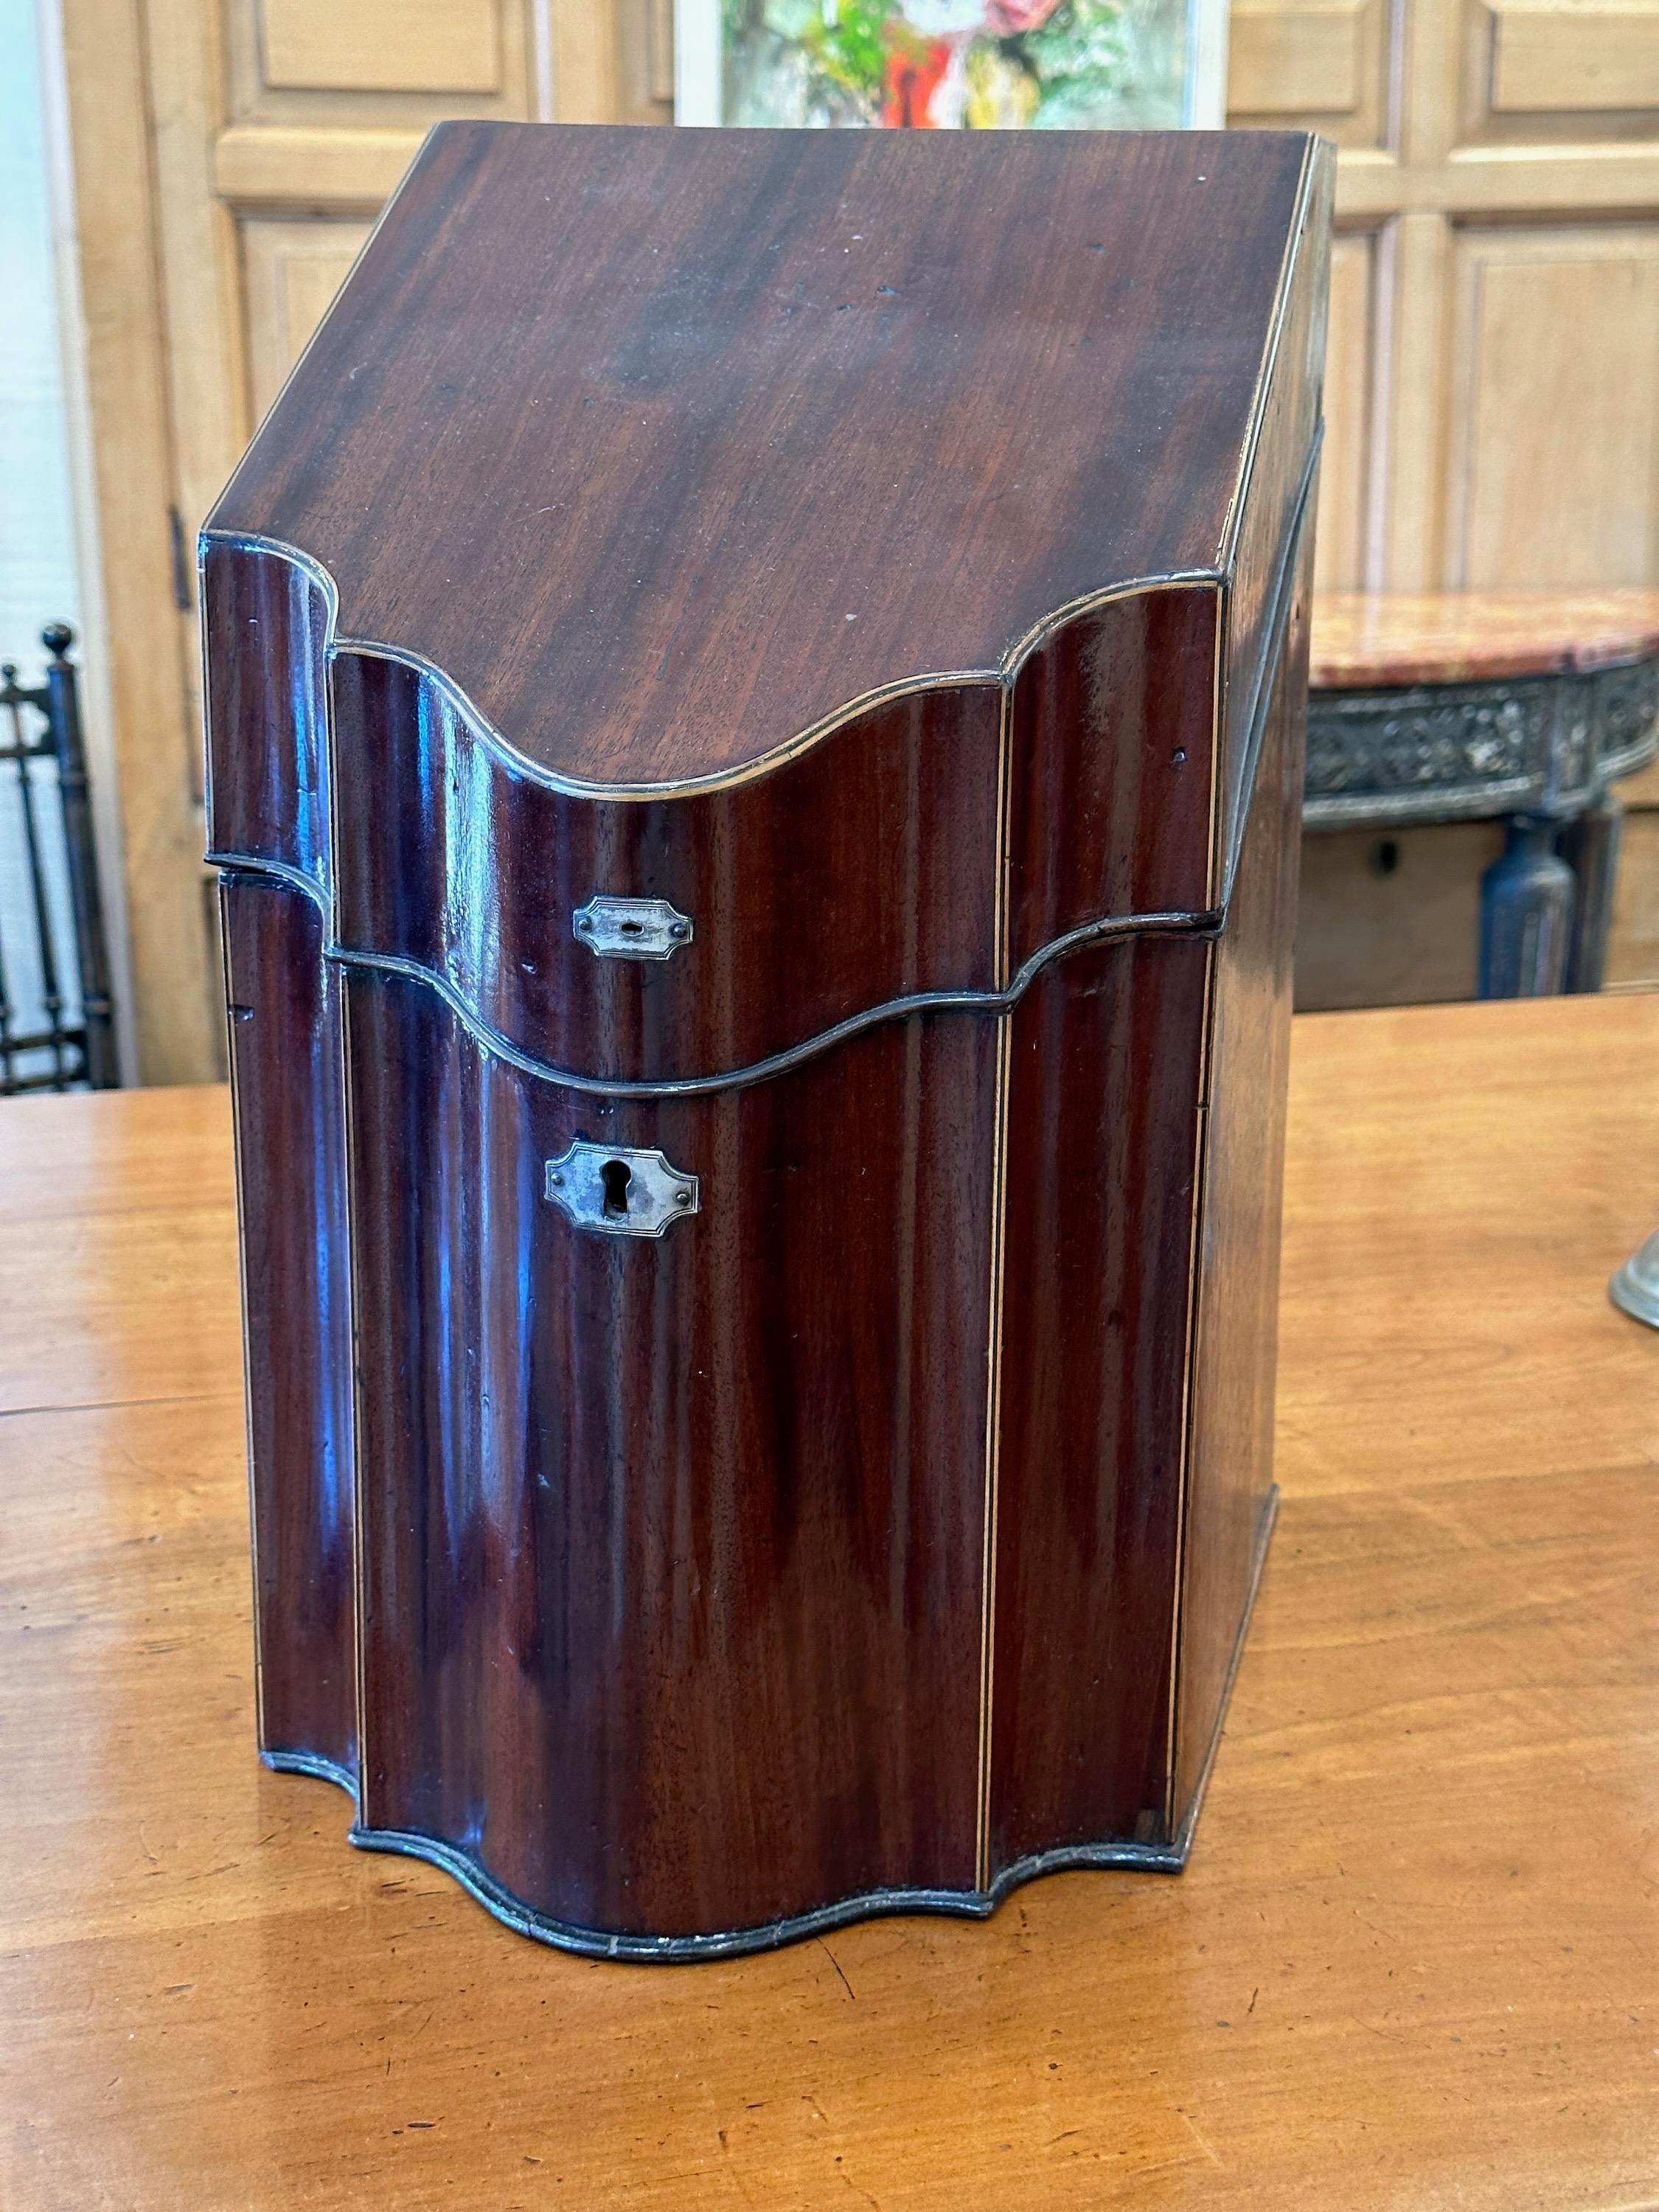 Nice inlay detail and mahogany grain stands out well.